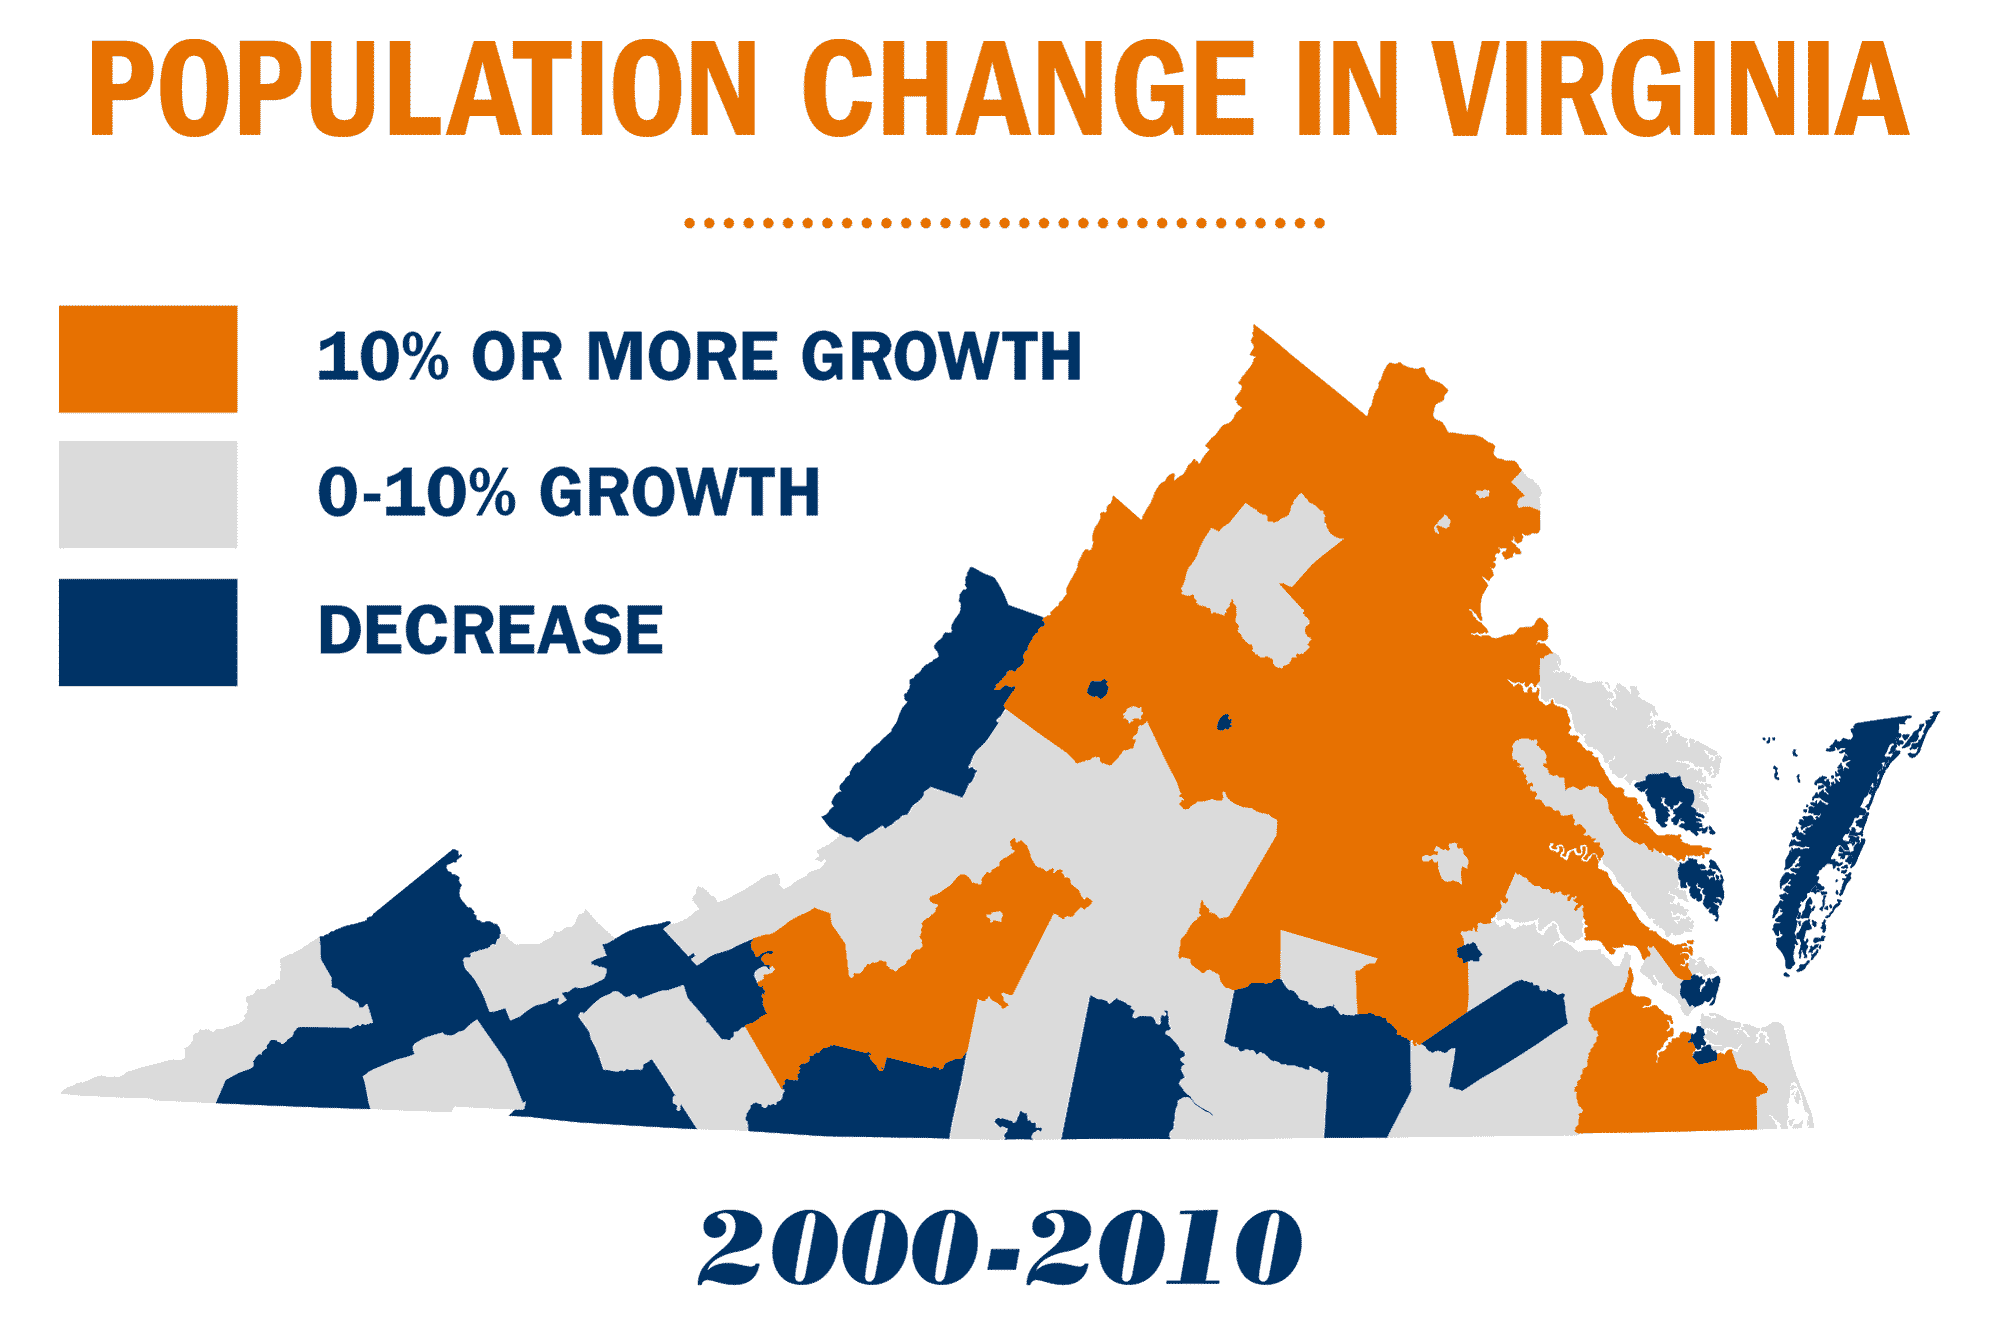 State of Virginia in various colors Text reads: Population change in Virginia Orange equals 10% or more growth grey equals 0-10% growth dark blue equals a decrease in growth